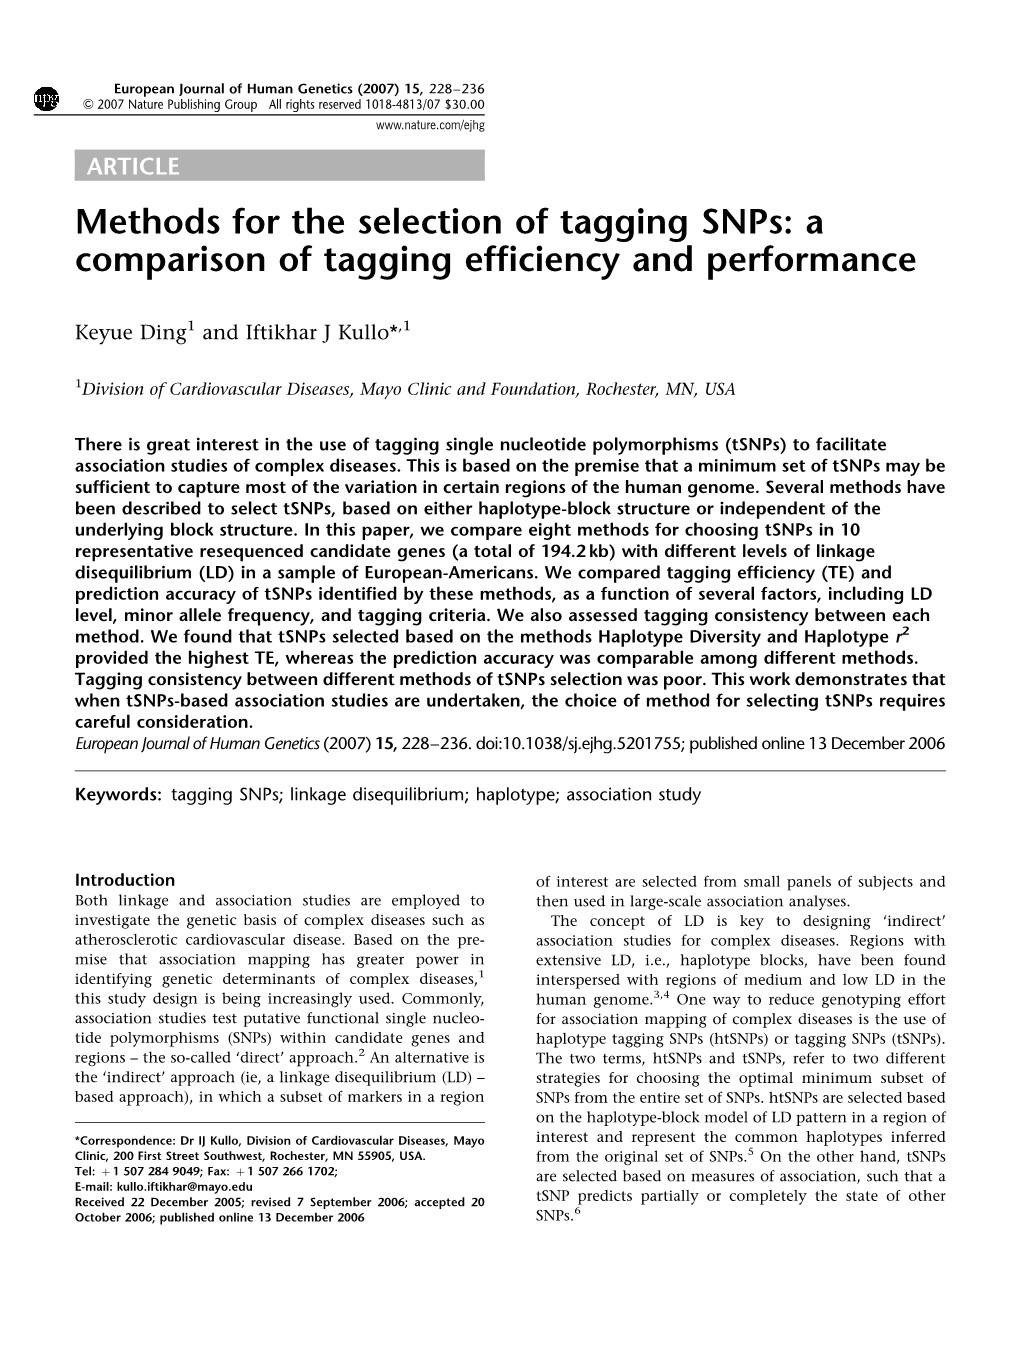 Methods for the Selection of Tagging Snps: a Comparison of Tagging Efficiency and Performance